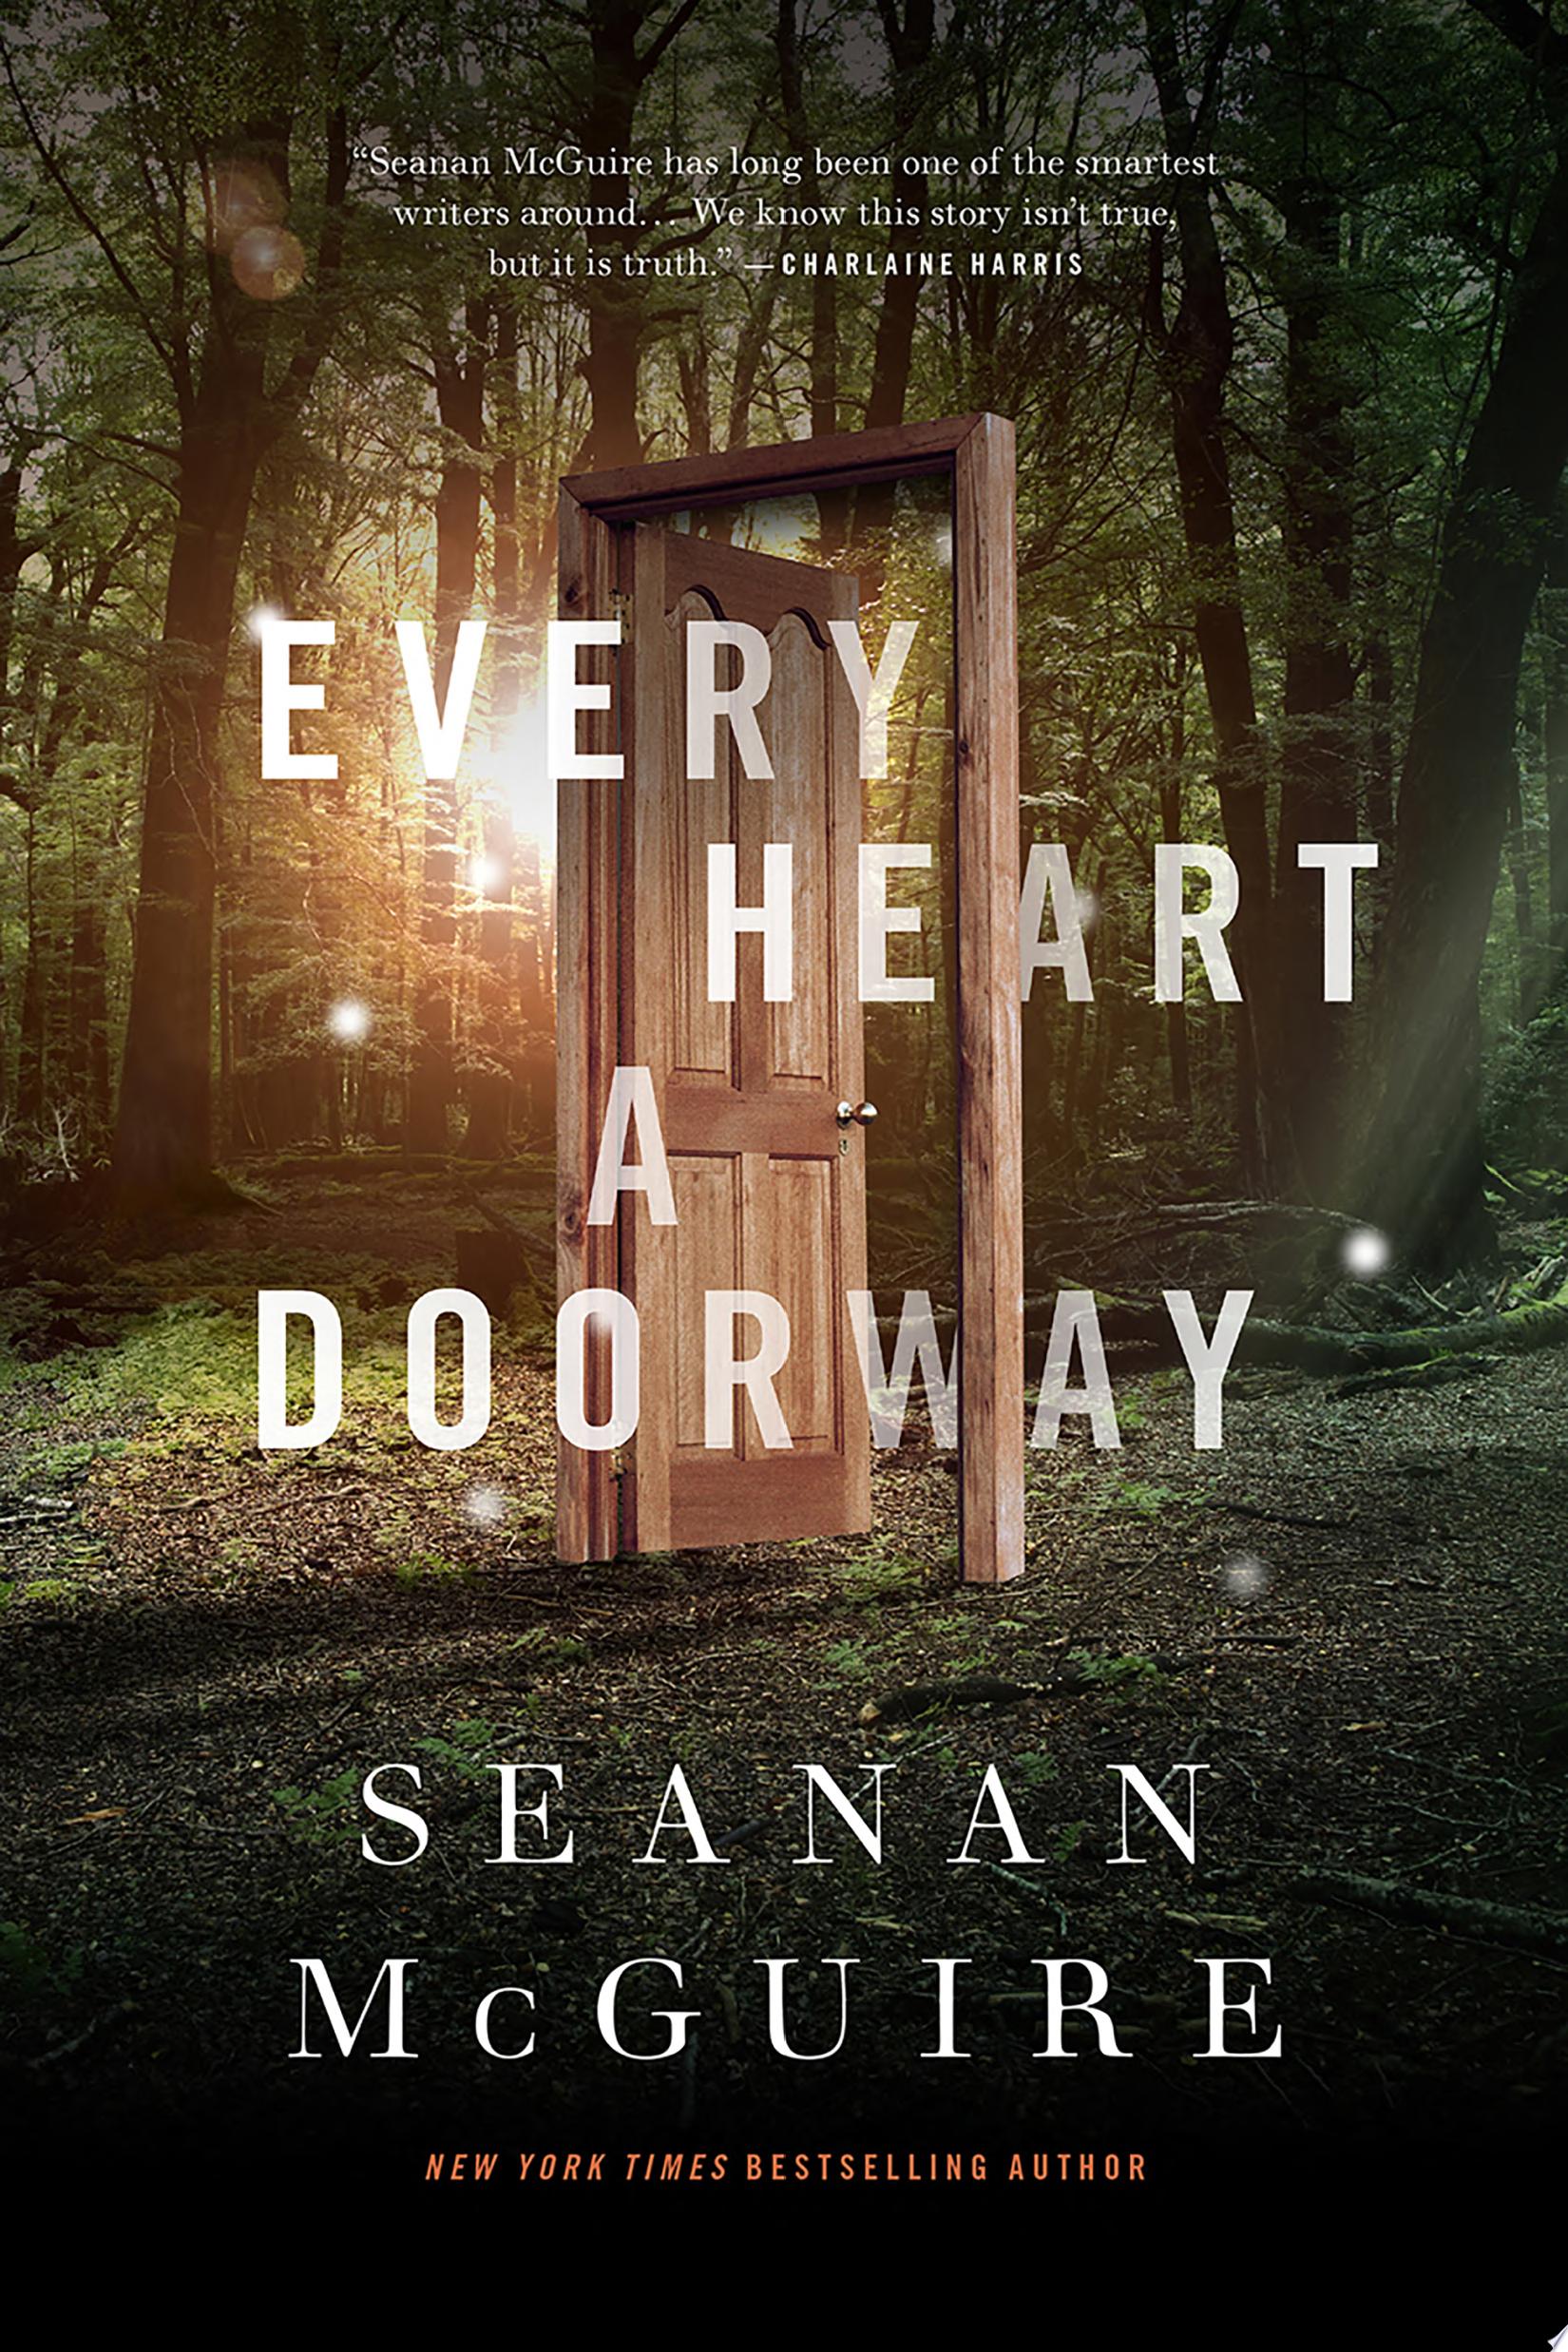 Image for "Every Heart a Doorway"